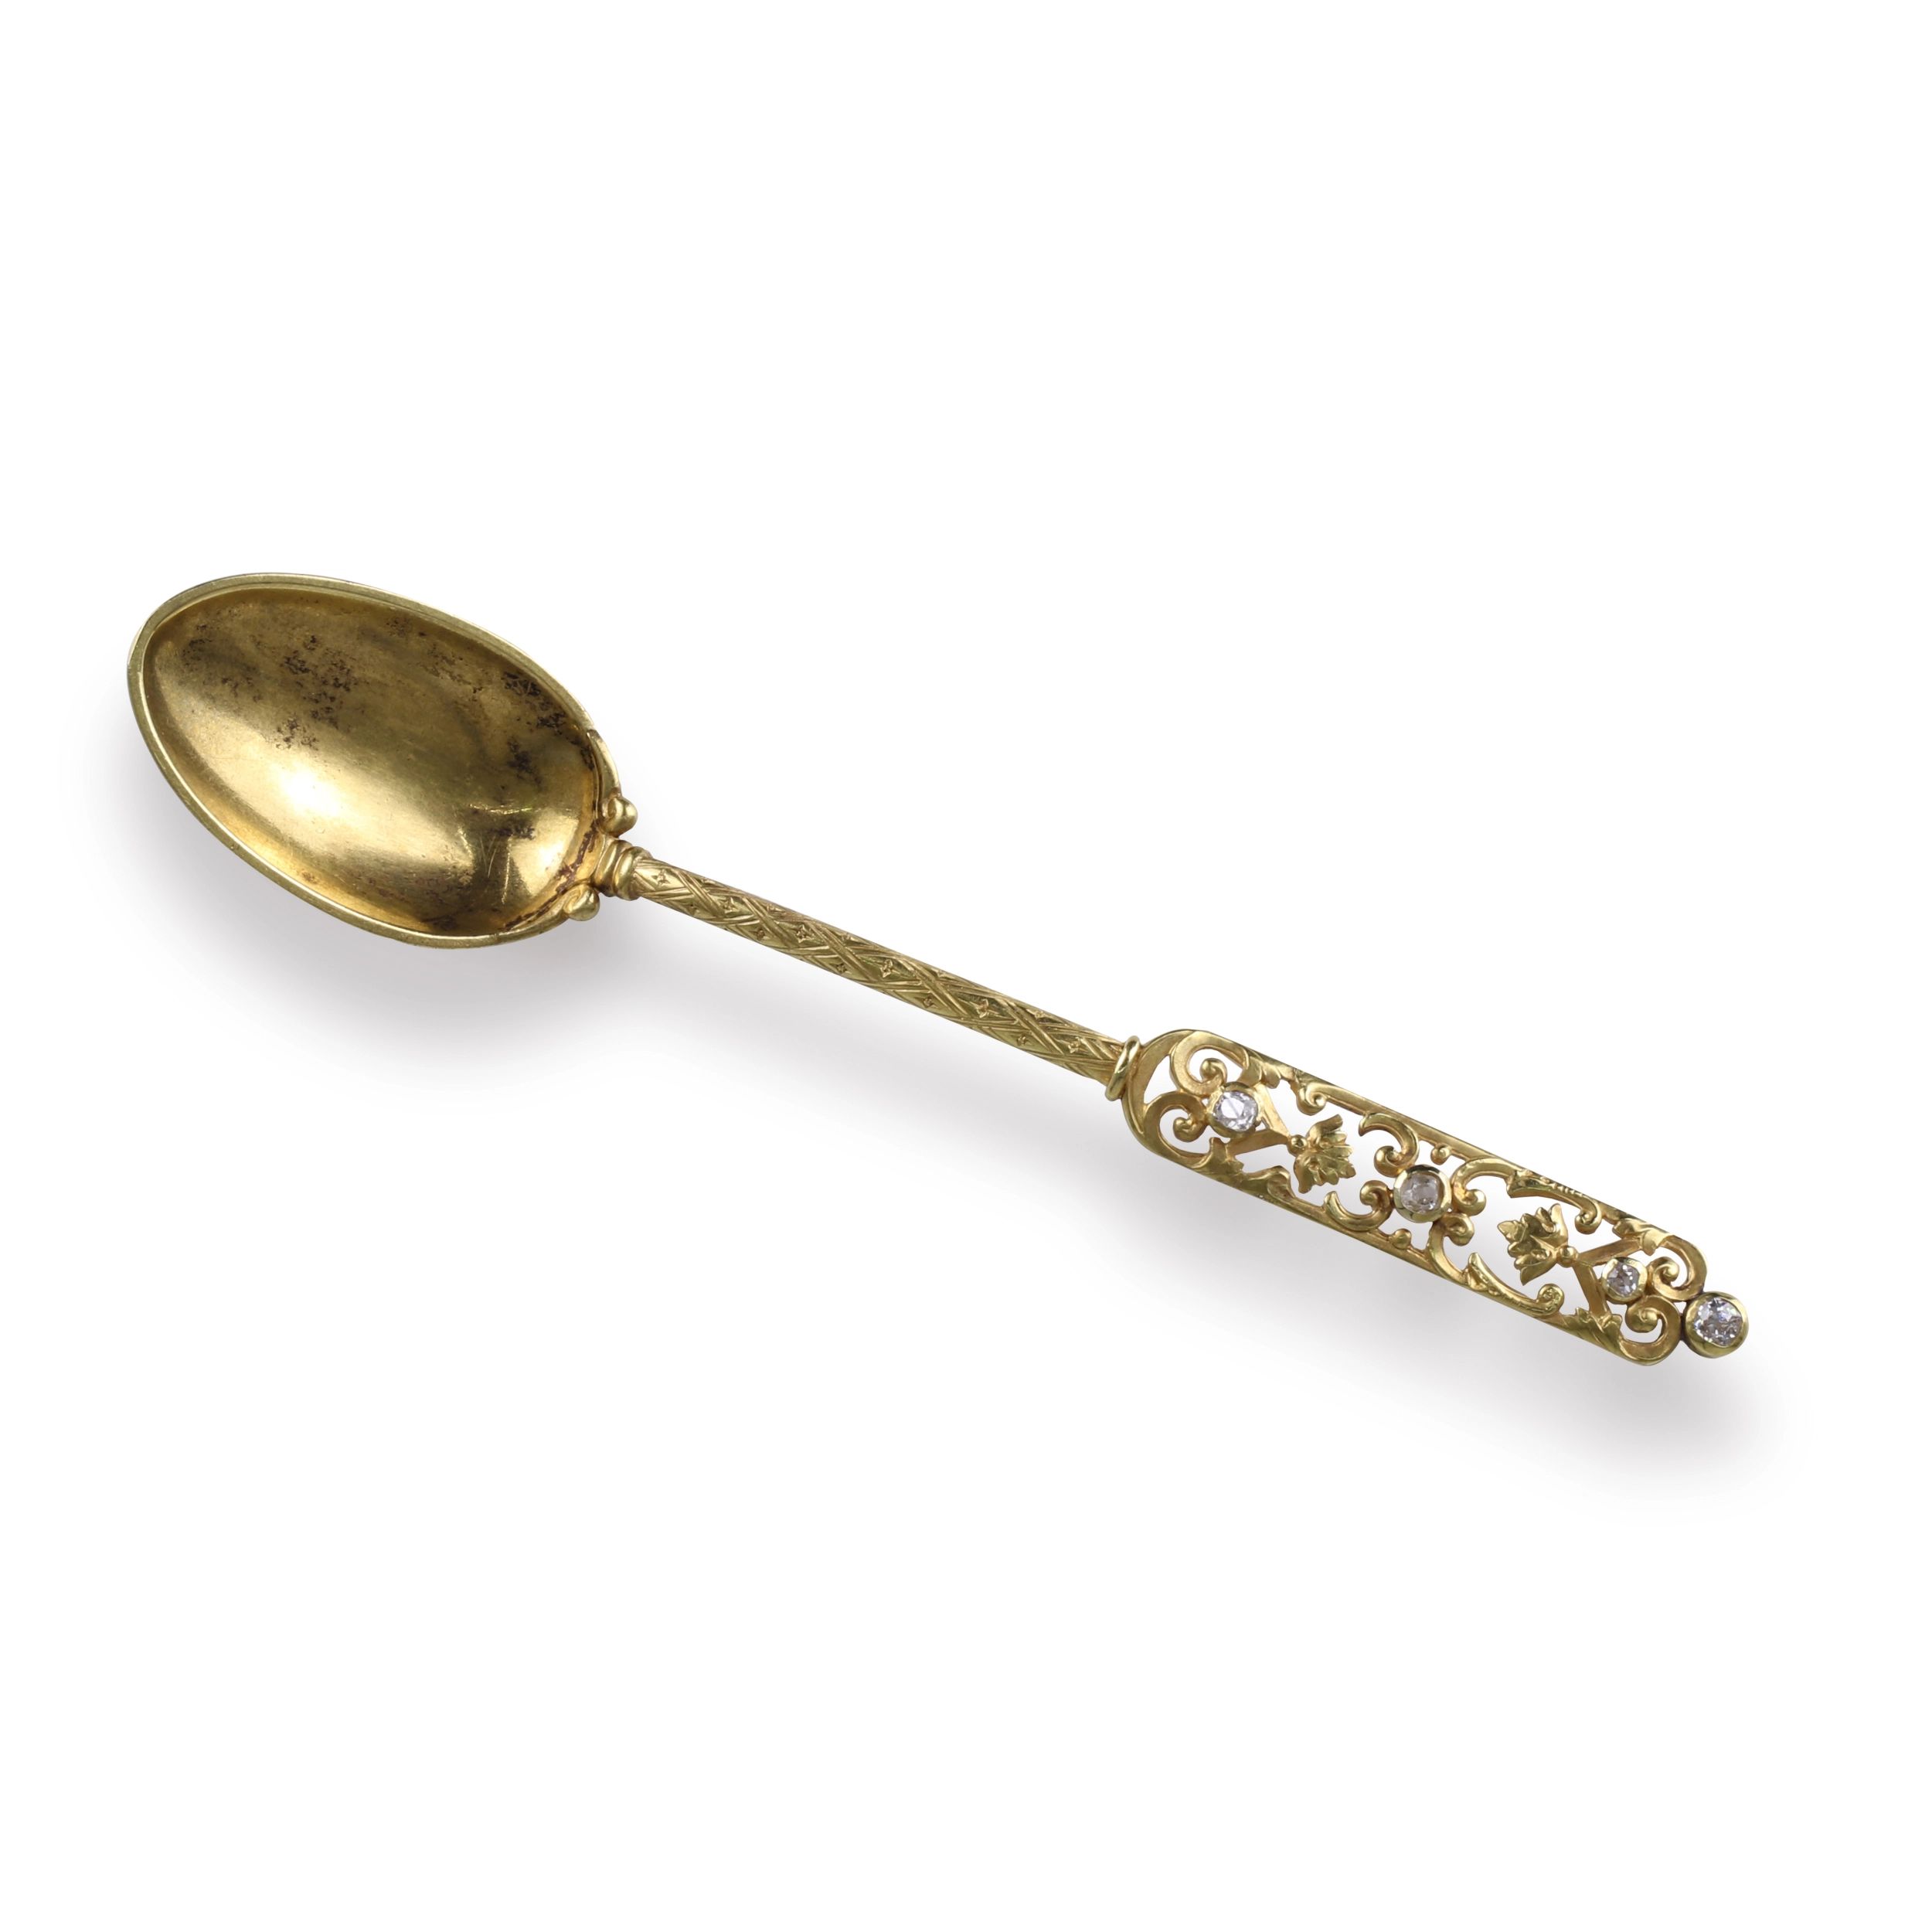 Golden spoon. C. Faberge. master August Wilhelm Holmstrom - Image 3 of 6